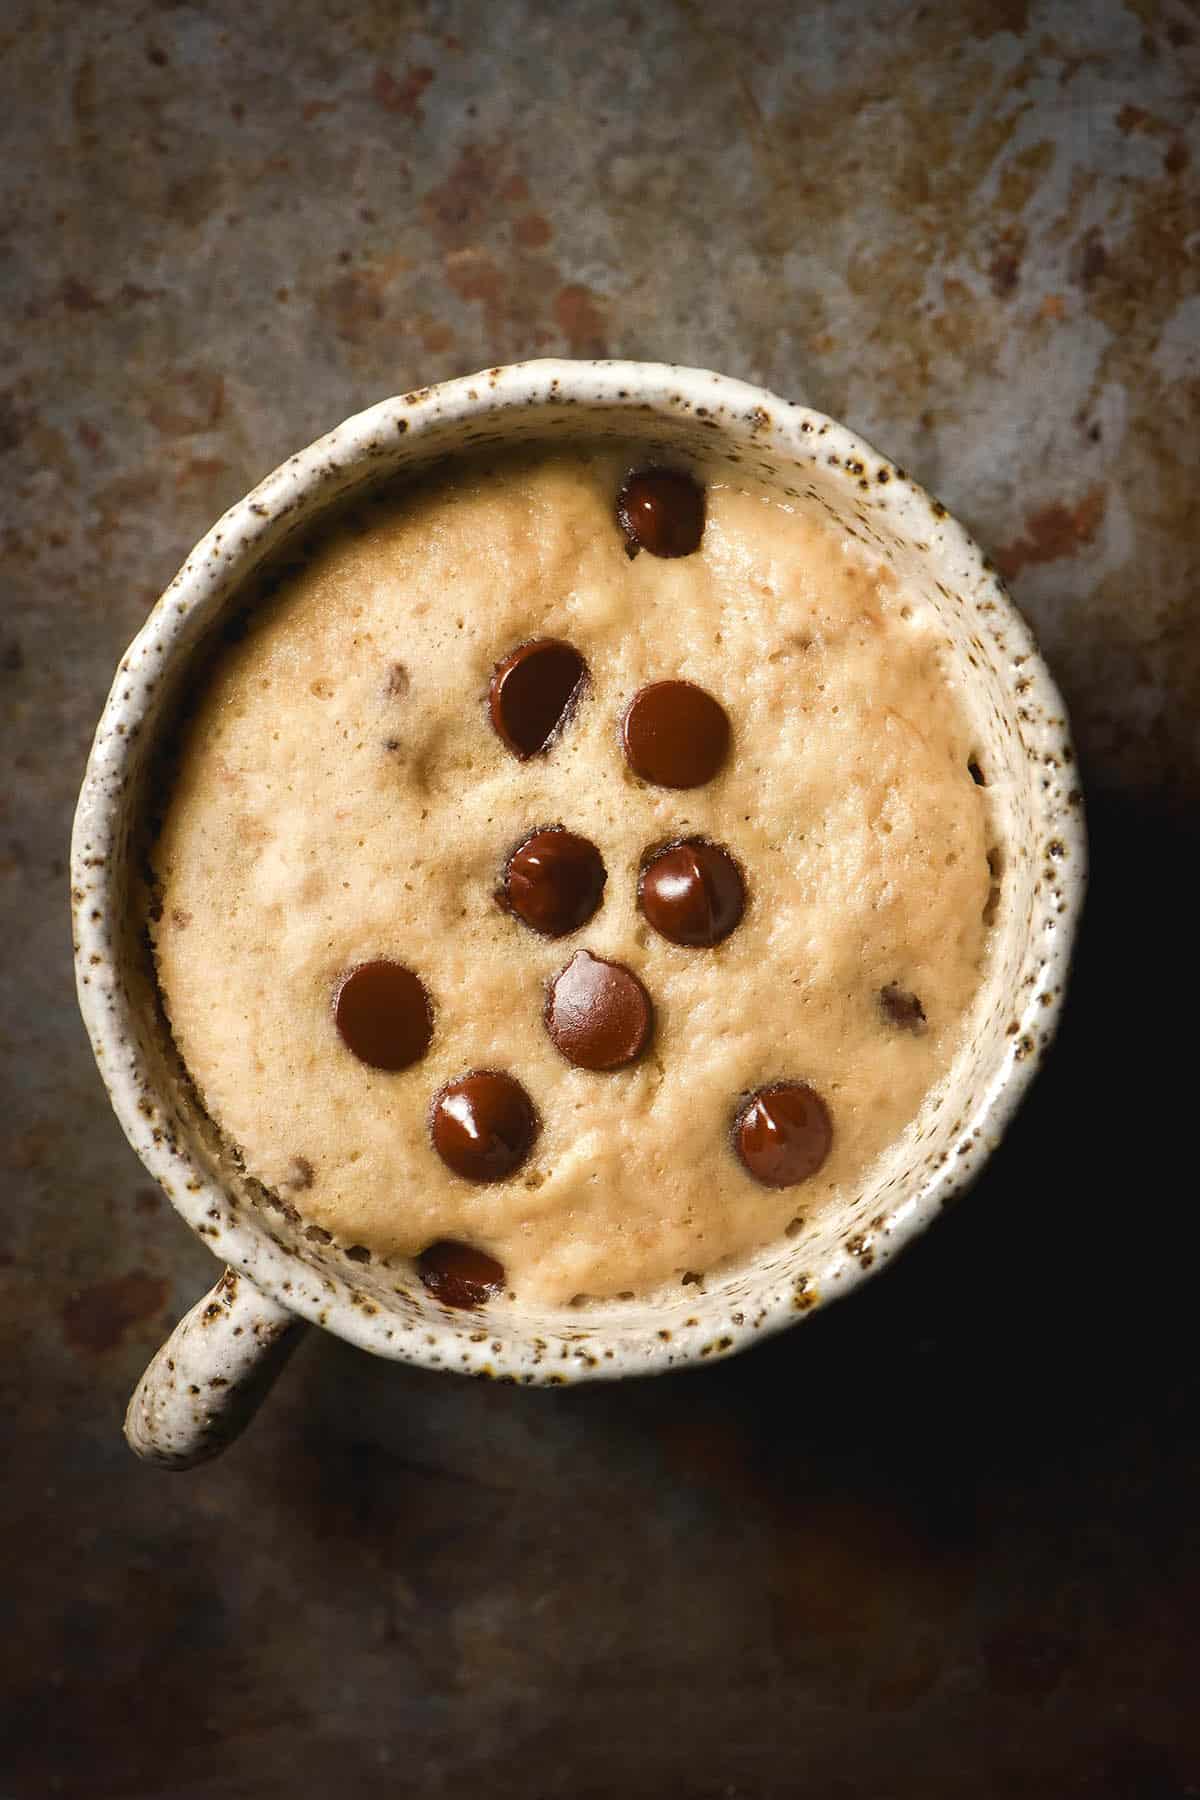 An aerial image of a gluten free banana choc chip mug cake in a white speckled ceramic mug on a dark steel backdrop.